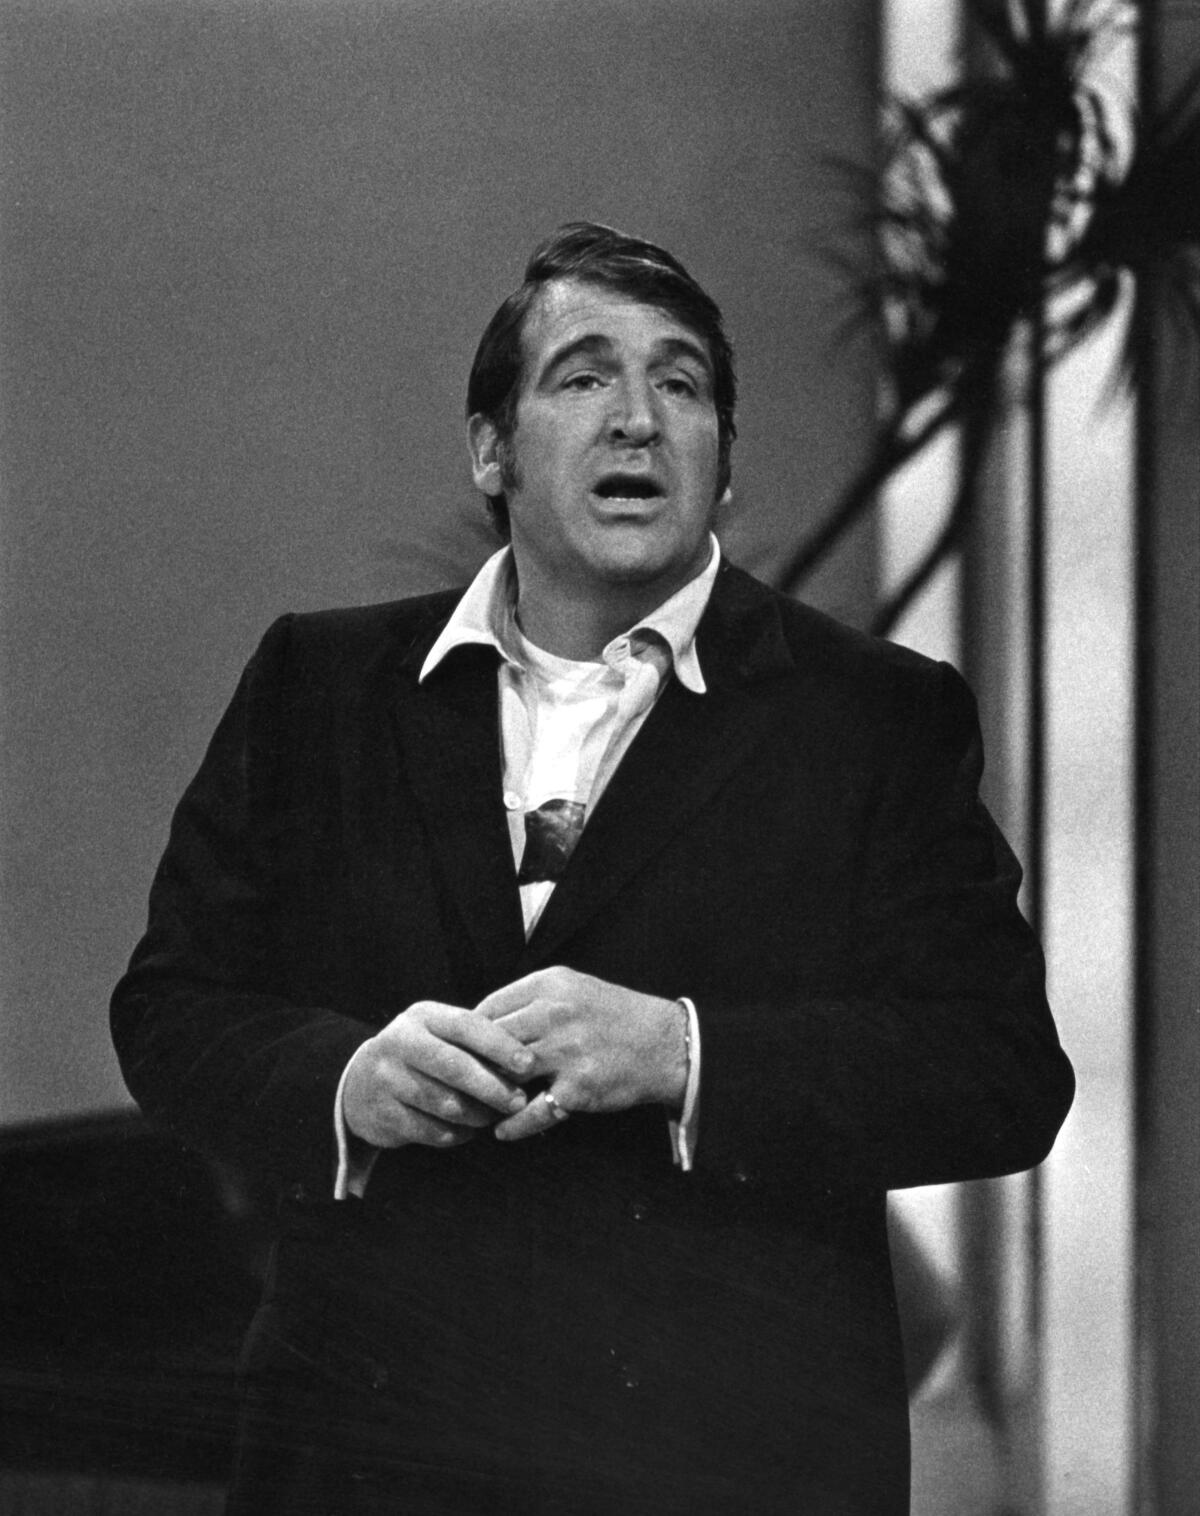 Shecky Greene wears a black blazer with a white collared shirt as he talks on a stage.